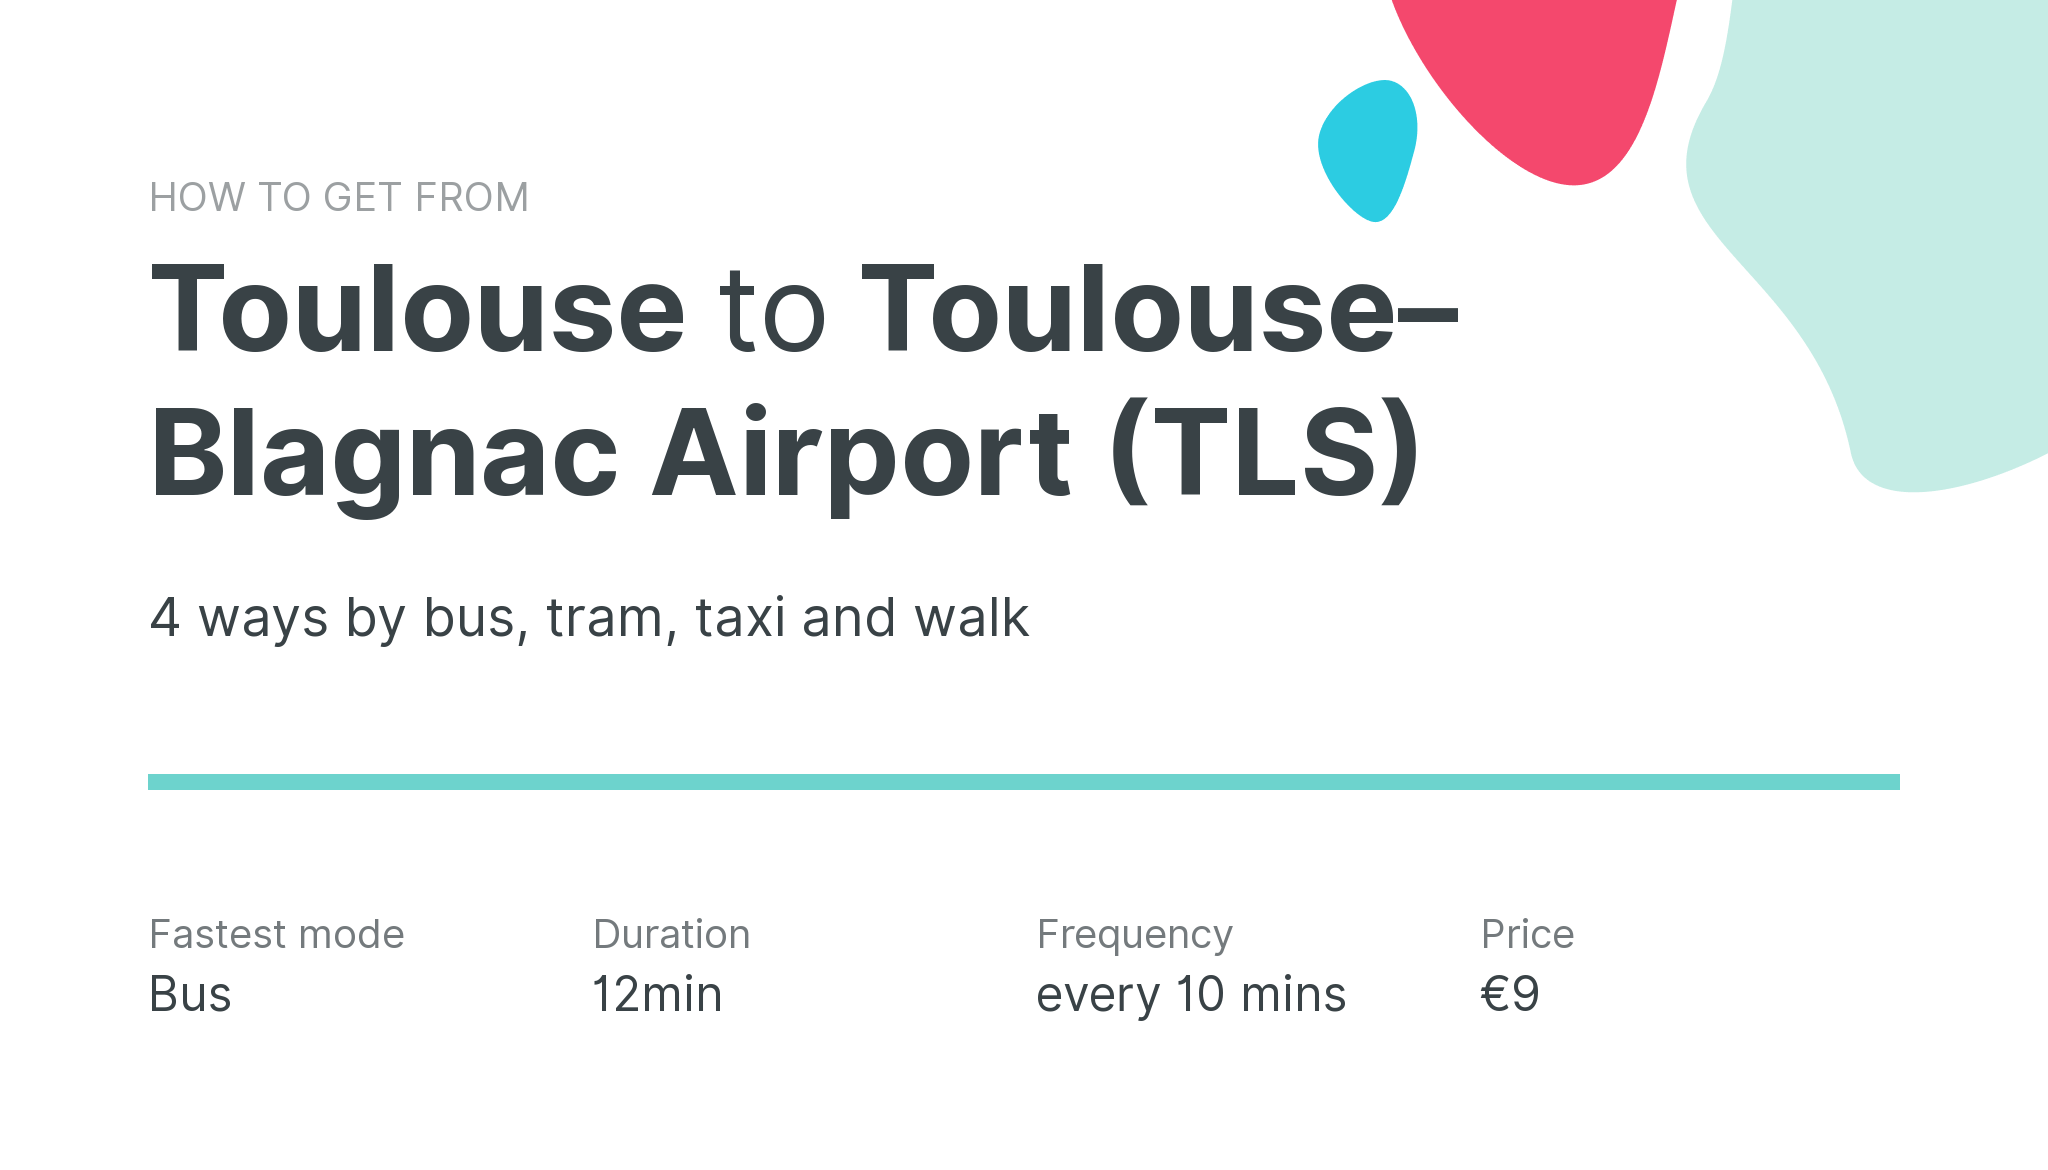 How do I get from Toulouse to Toulouse–Blagnac Airport (TLS)